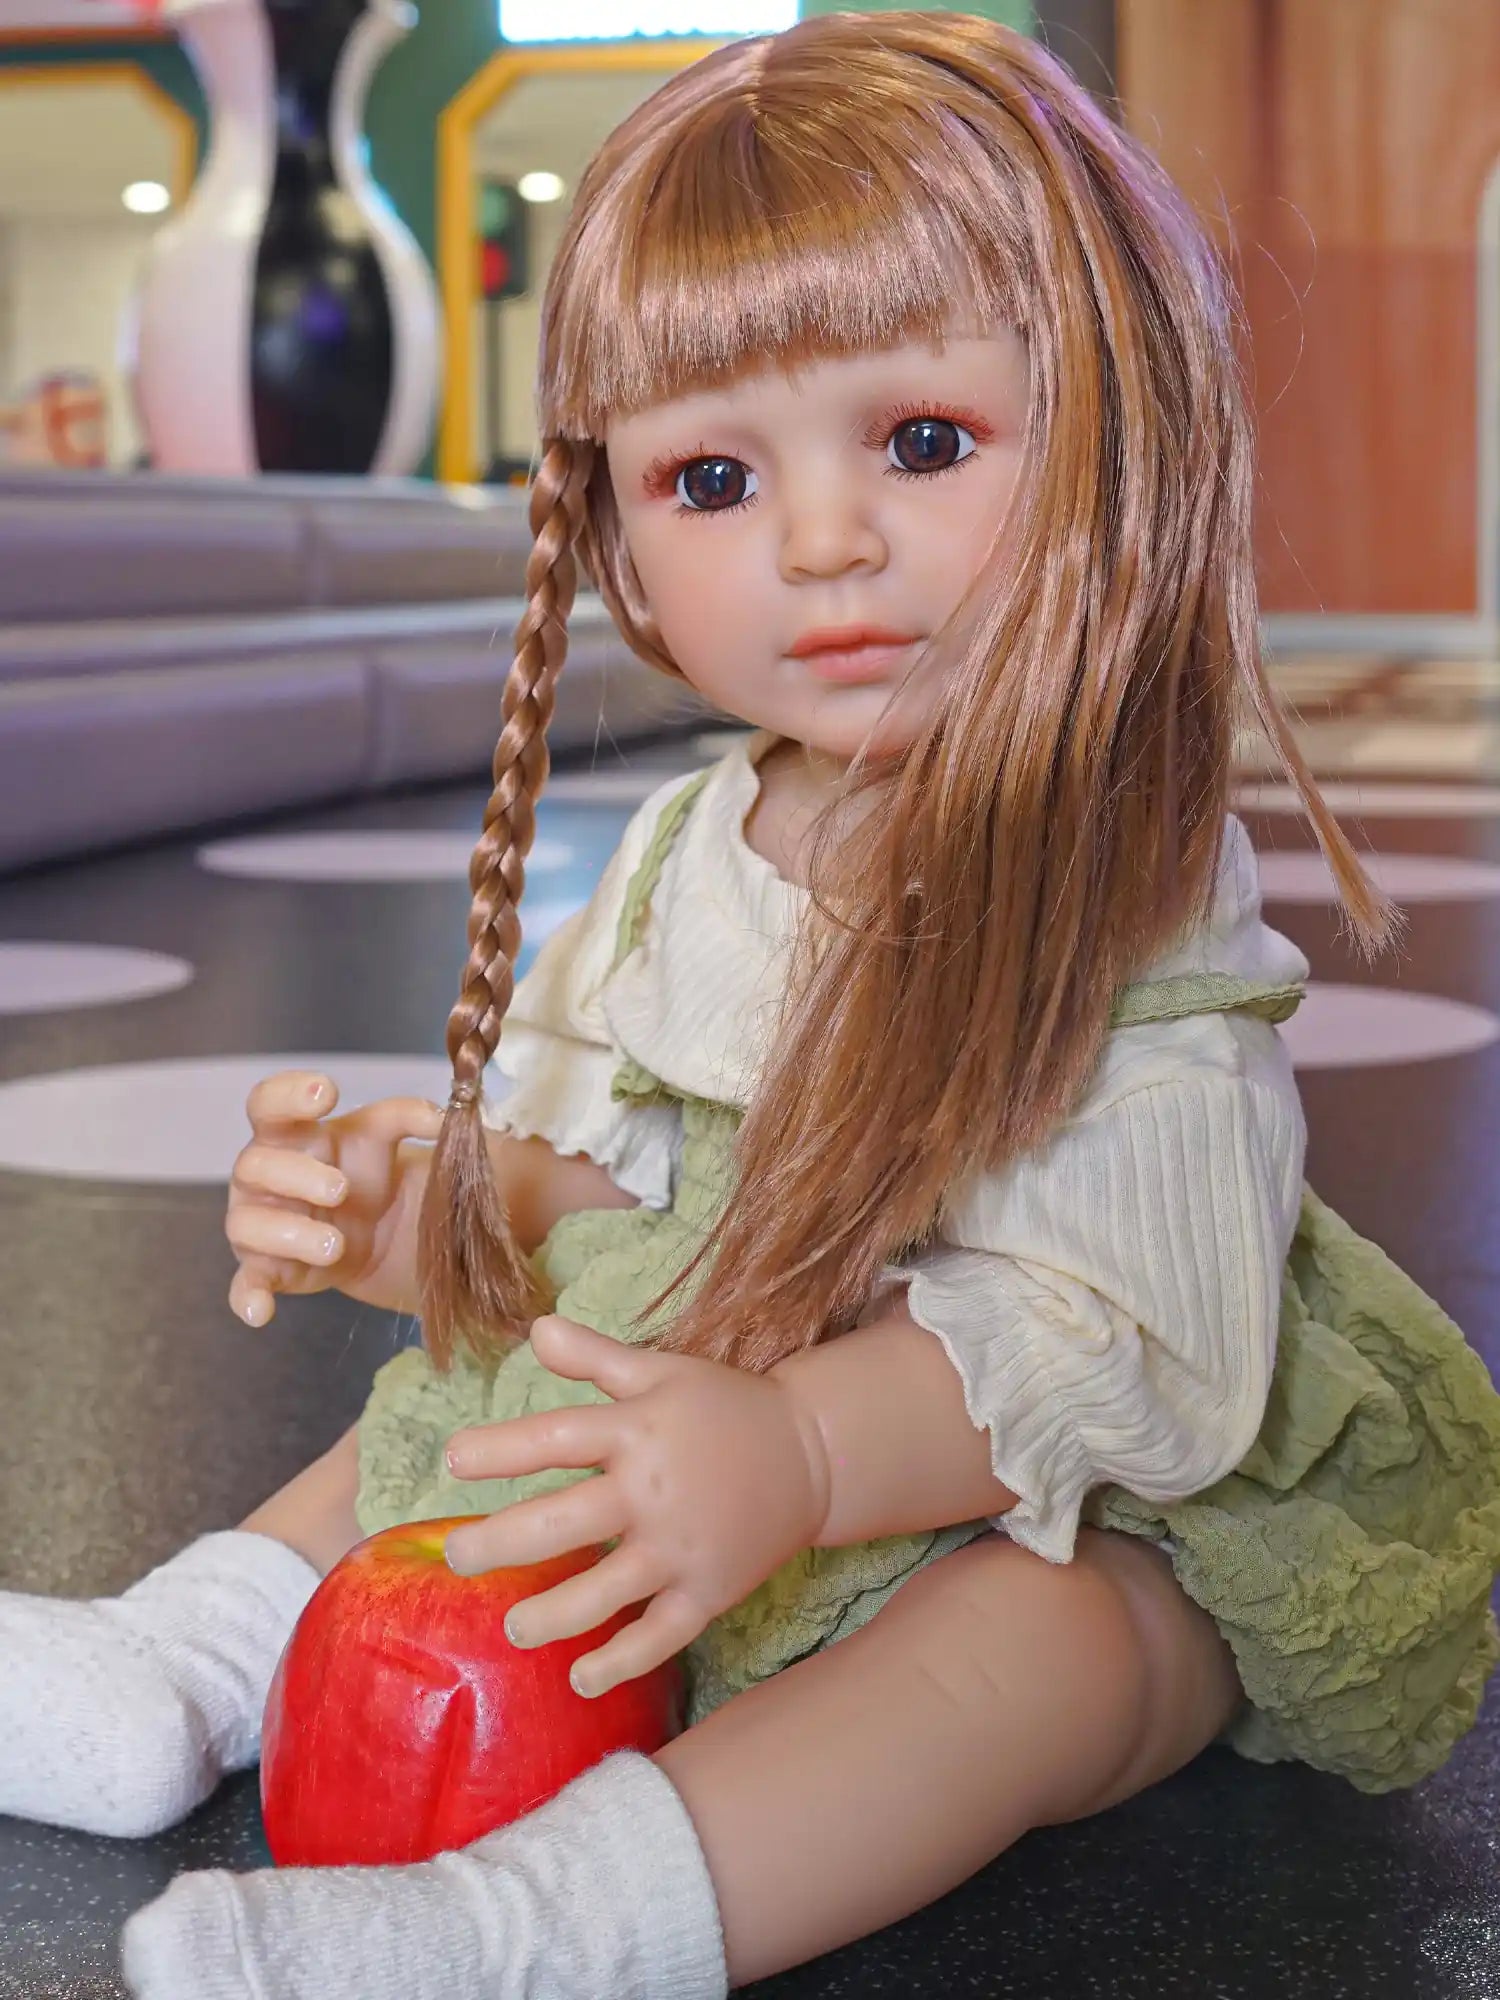 Doll with braids and green dress holding an apple, sitting on the floor.